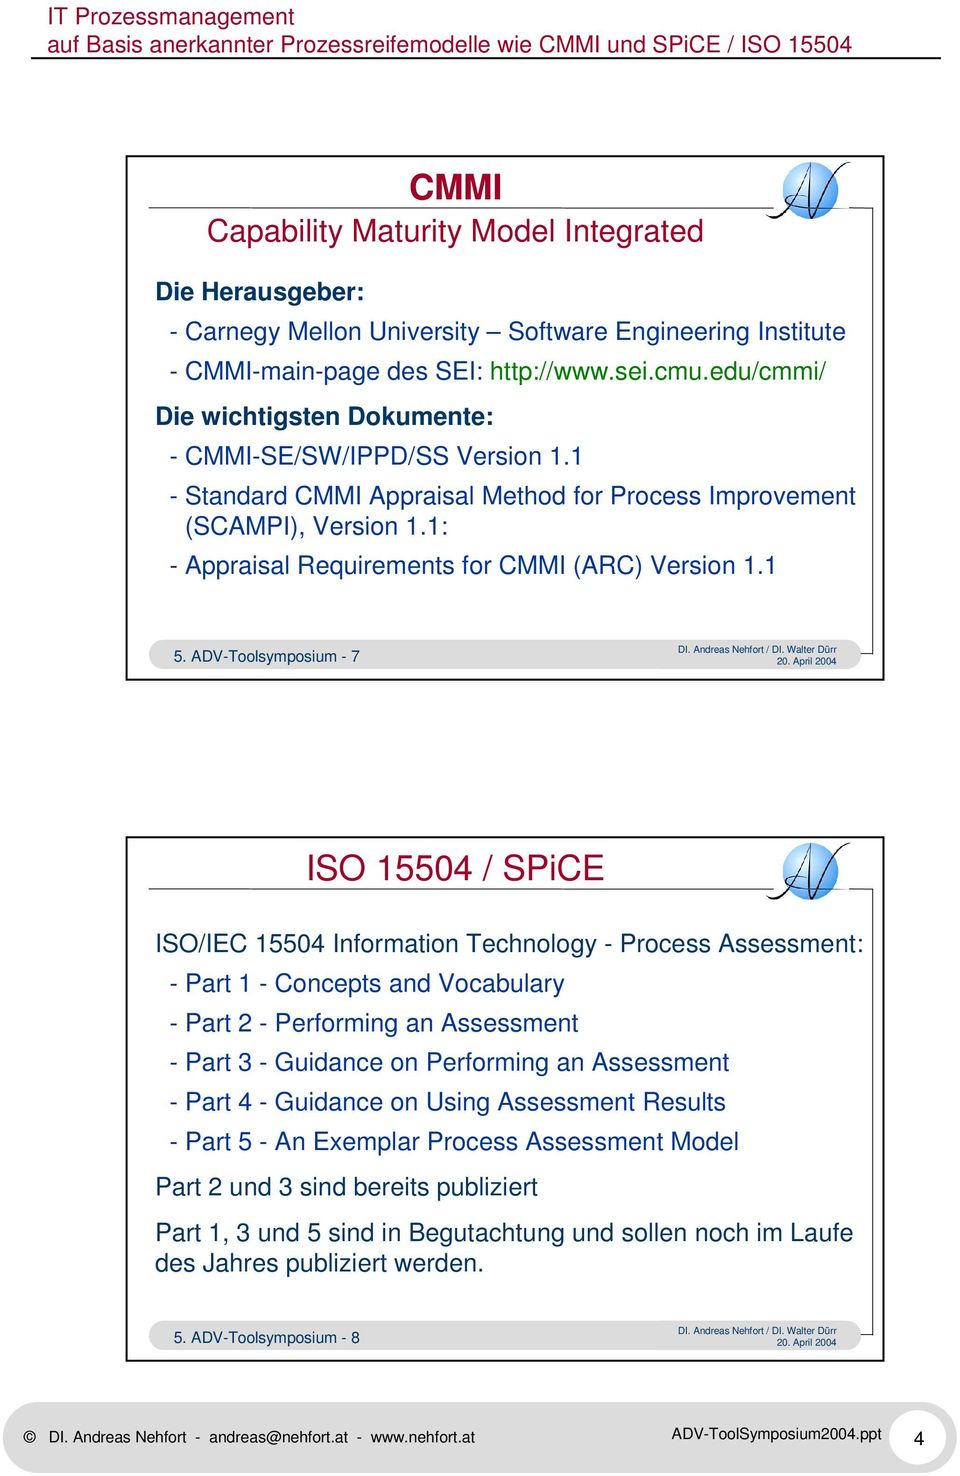 1 5. ADV-Toolsymposium - 7 ISO 15504 / SPiCE ISO/IEC 15504 Information Technology - Process Assessment: - Part 1 - Concepts and Vocabulary - Part 2 - Performing an Assessment - Part 3 - Guidance on